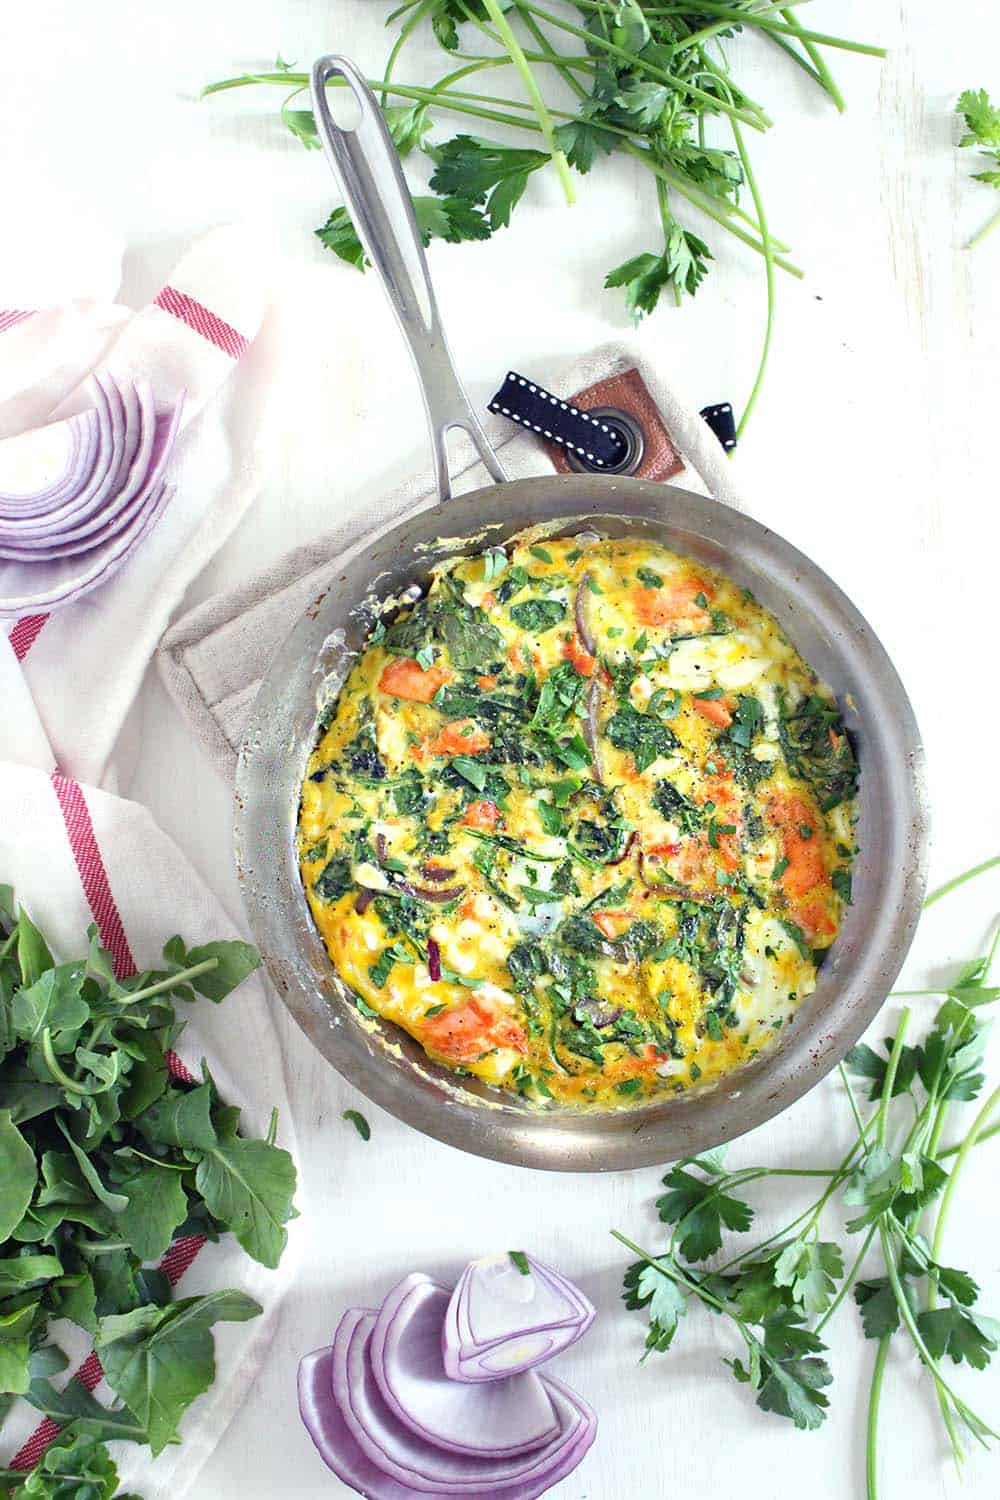 This salmon, arugula, and feta frittata is a great way to use up leftover cooked salmon! This low-carb, gluten free, easy recipe comes together in only 20 minutes.